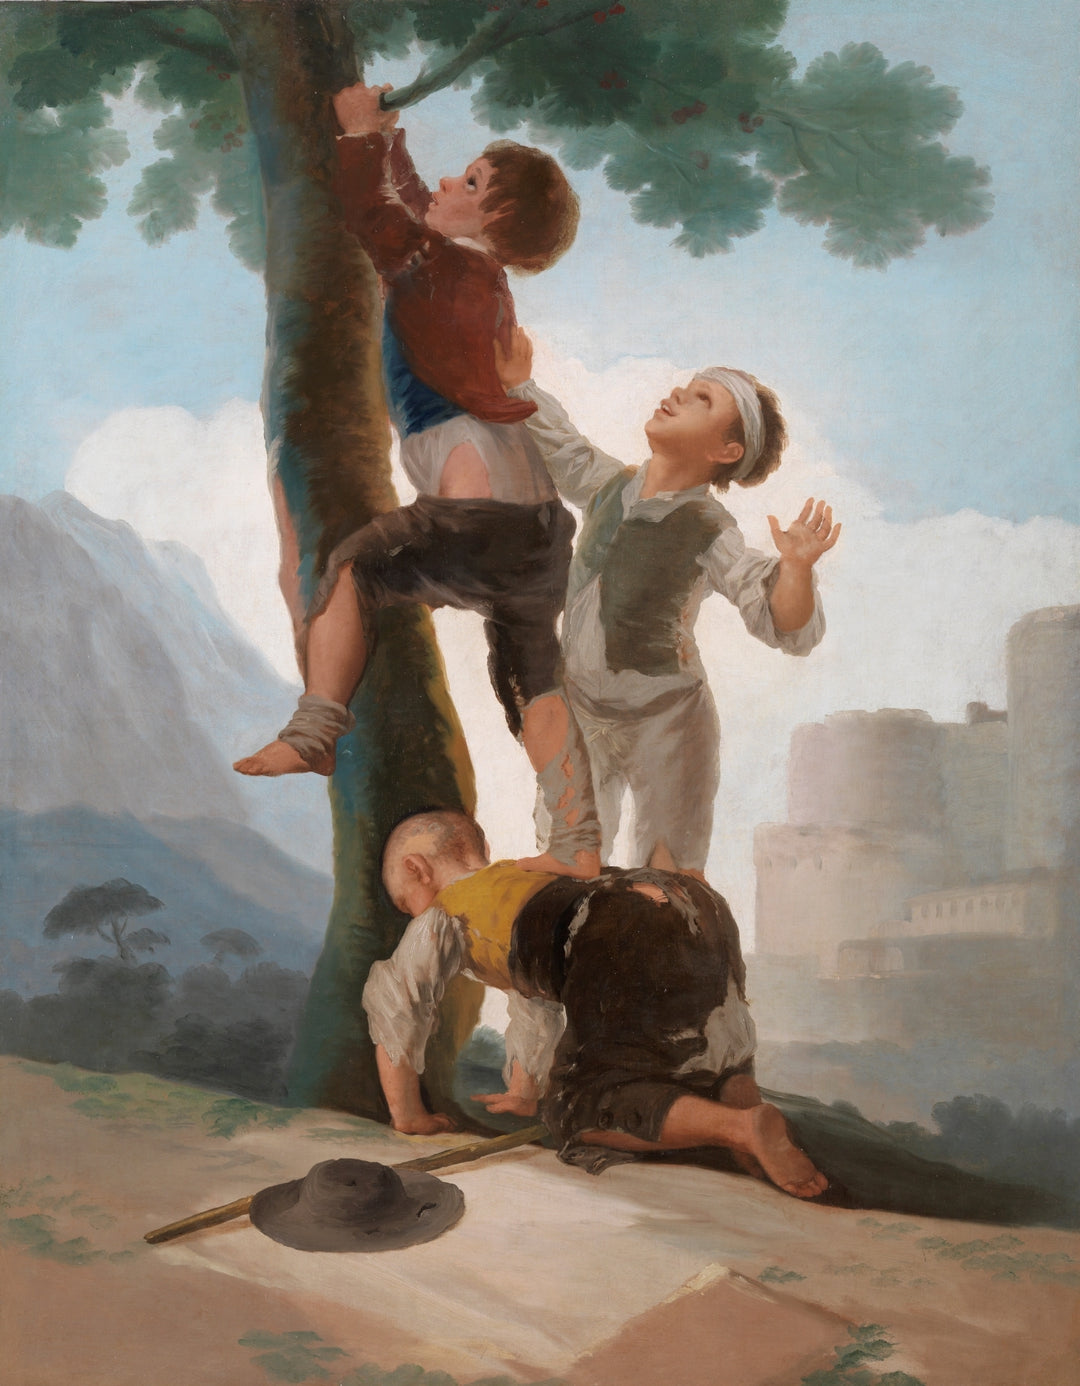 Boys Climbing a Tree by Francisco Goya, Reproduction for Sale